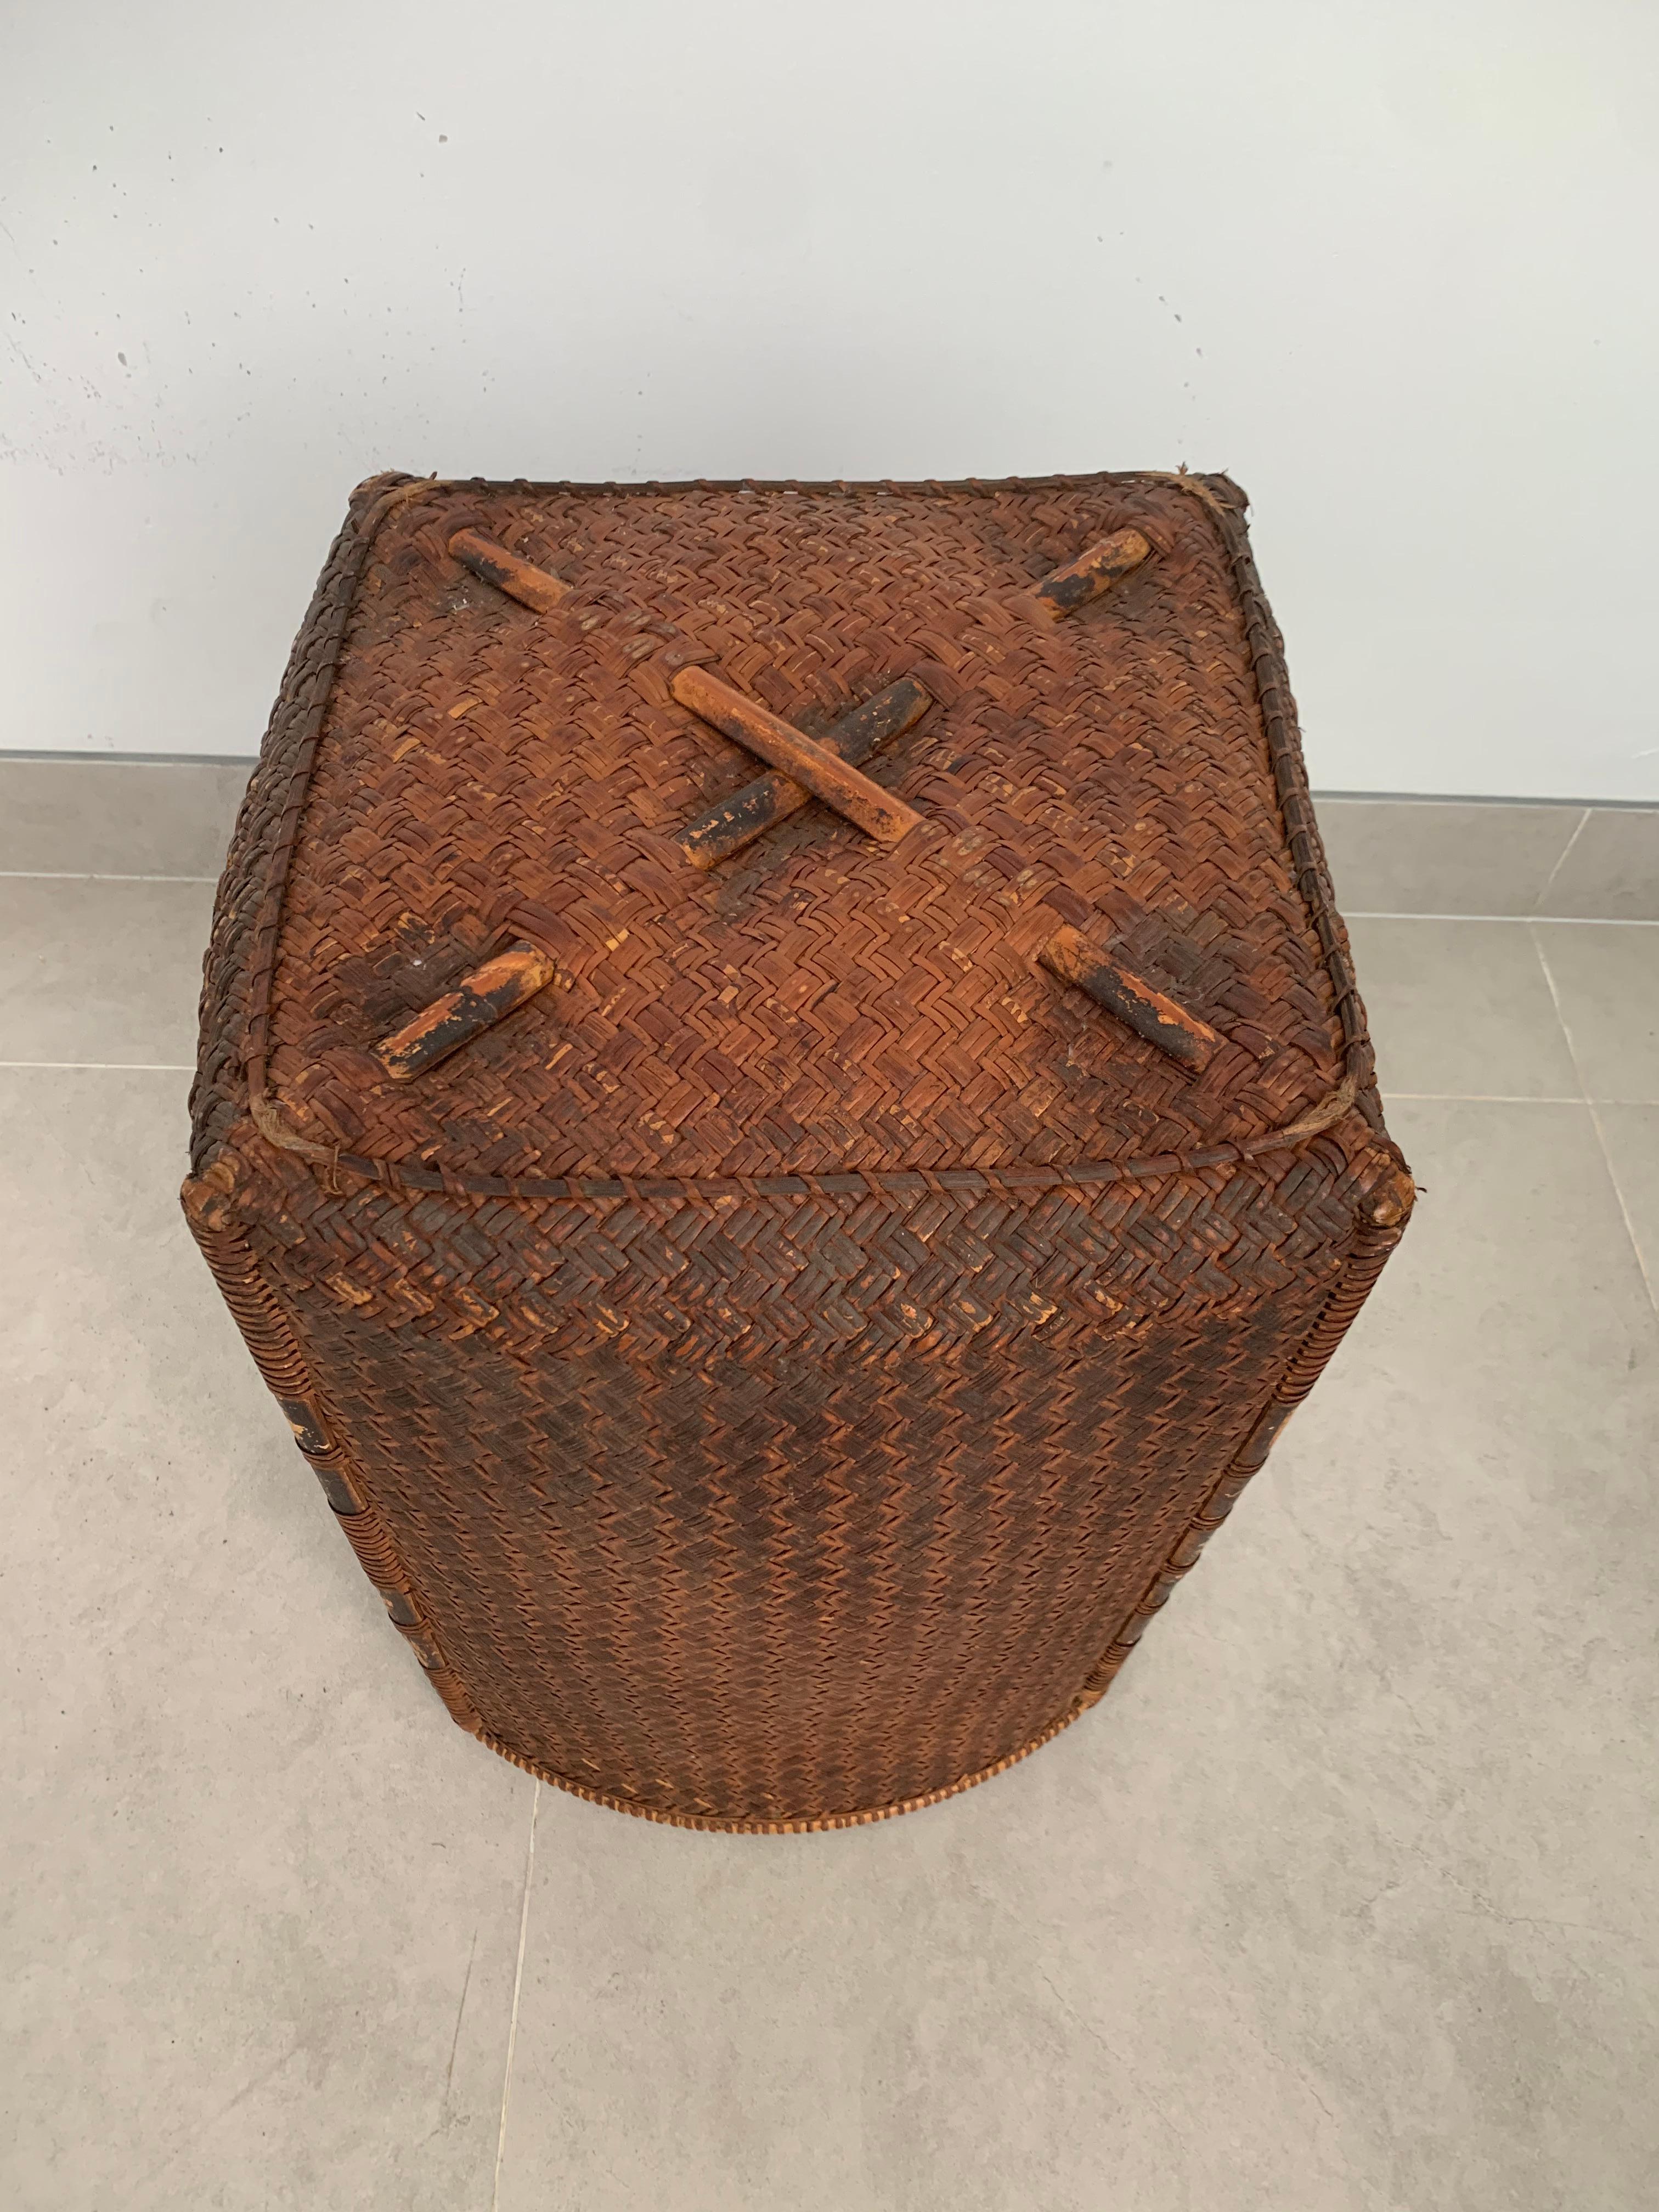 Rattan Basket Dayak Tribe Hand-Woven from Kalimantan, Borneo, Mid 20th Century For Sale 4